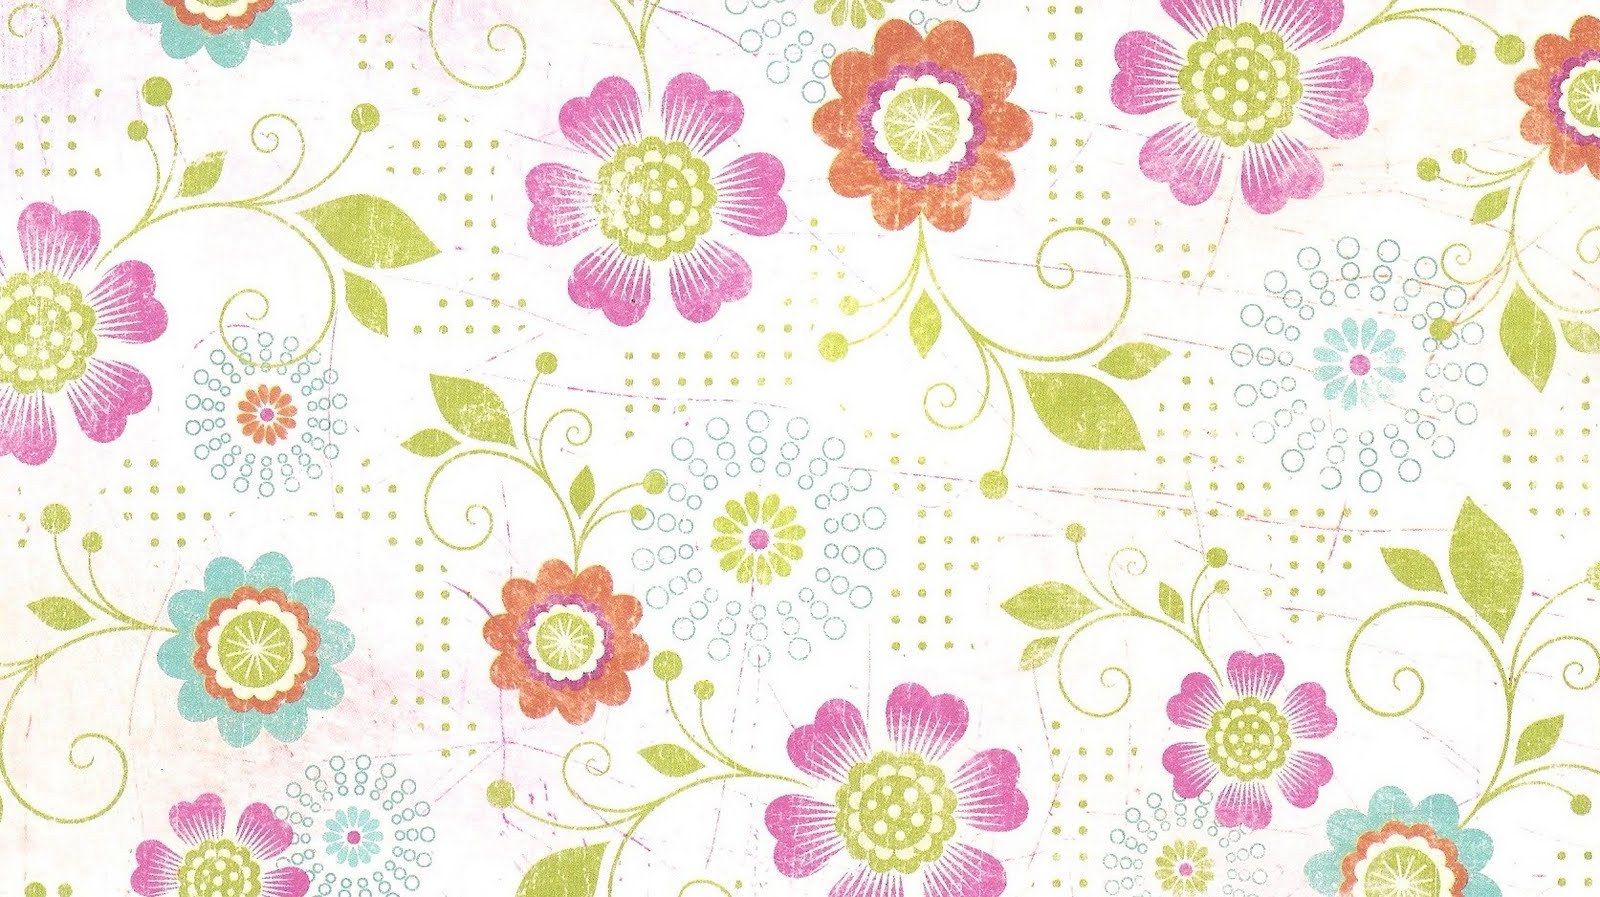 Bubblegum and Duct Tape: Using Scrapbook Paper As Your Header Background